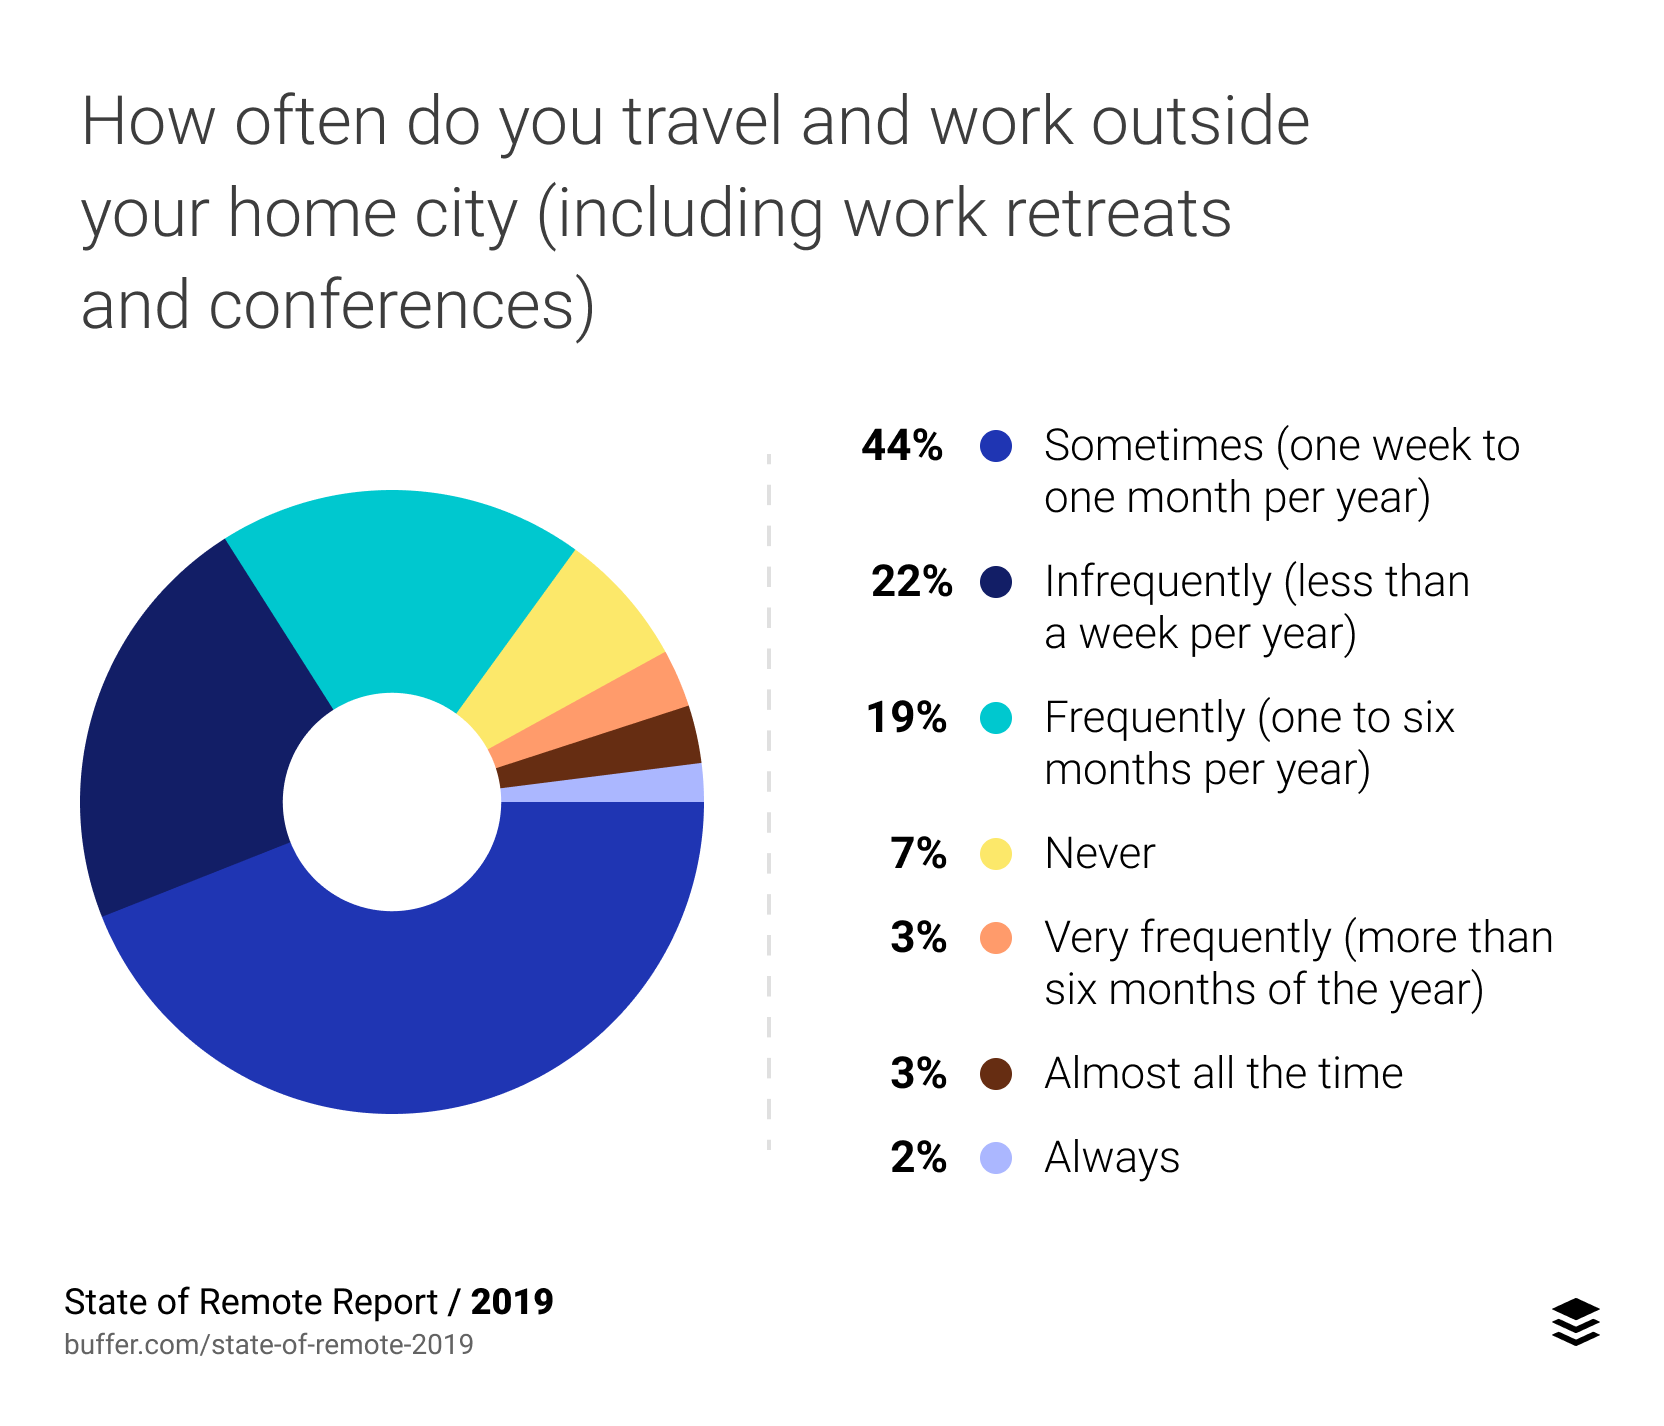 How often do you travel outside of your home city and work at the same time? (This includes work retreats, conferences, and any time you’re working in a different city.)